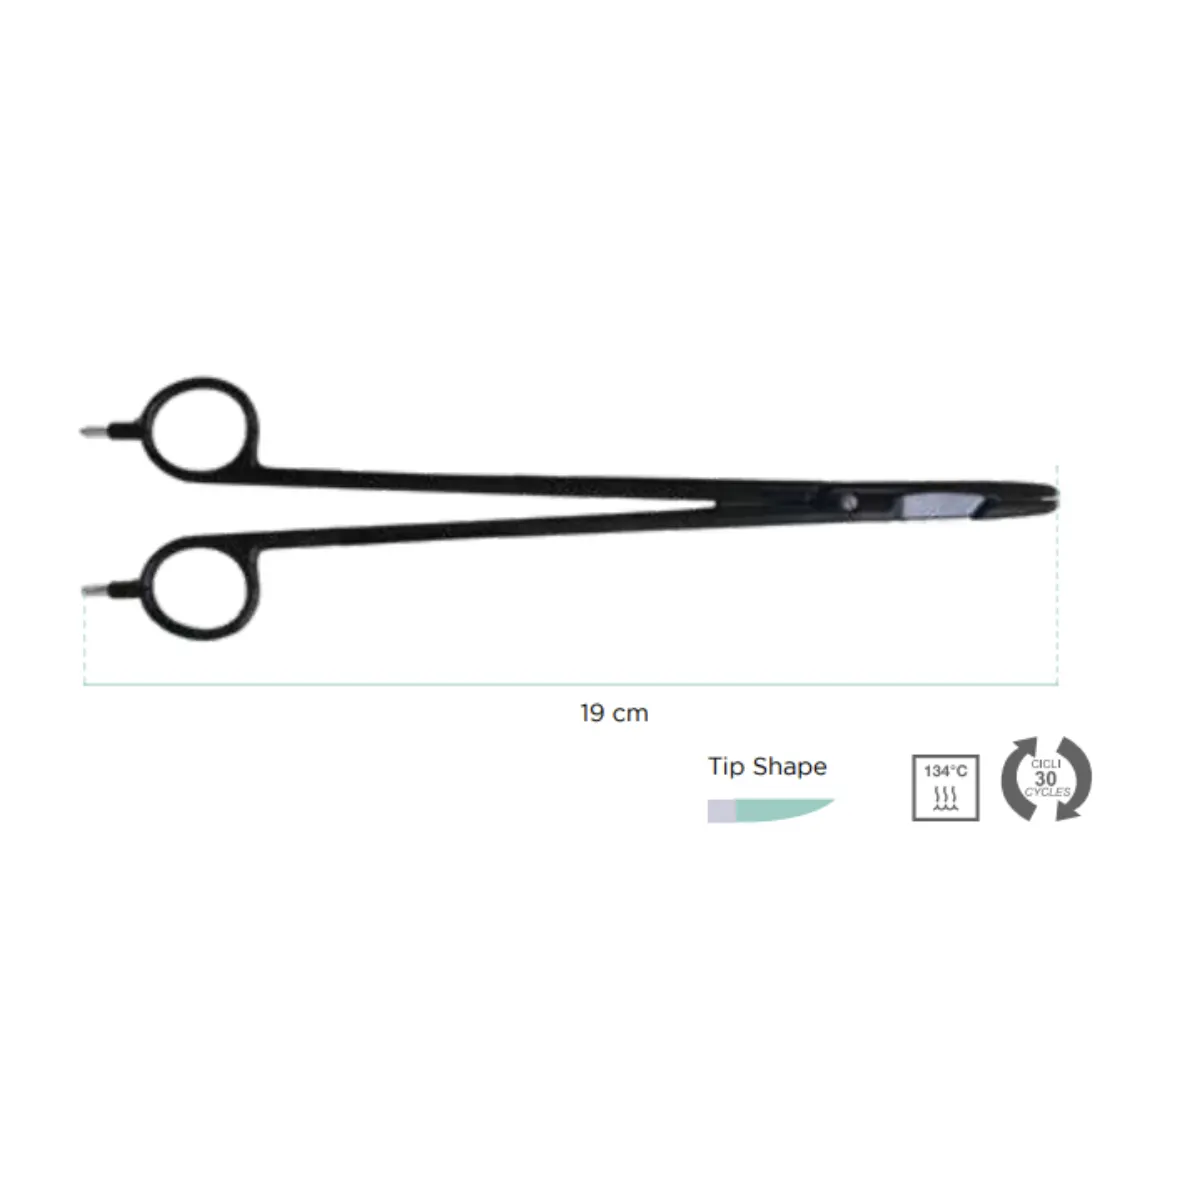 Cutting-Edge Bipolar Forceps for Surgery - 19cm Clamp Scissors | Sterility Assured for Safe Operations